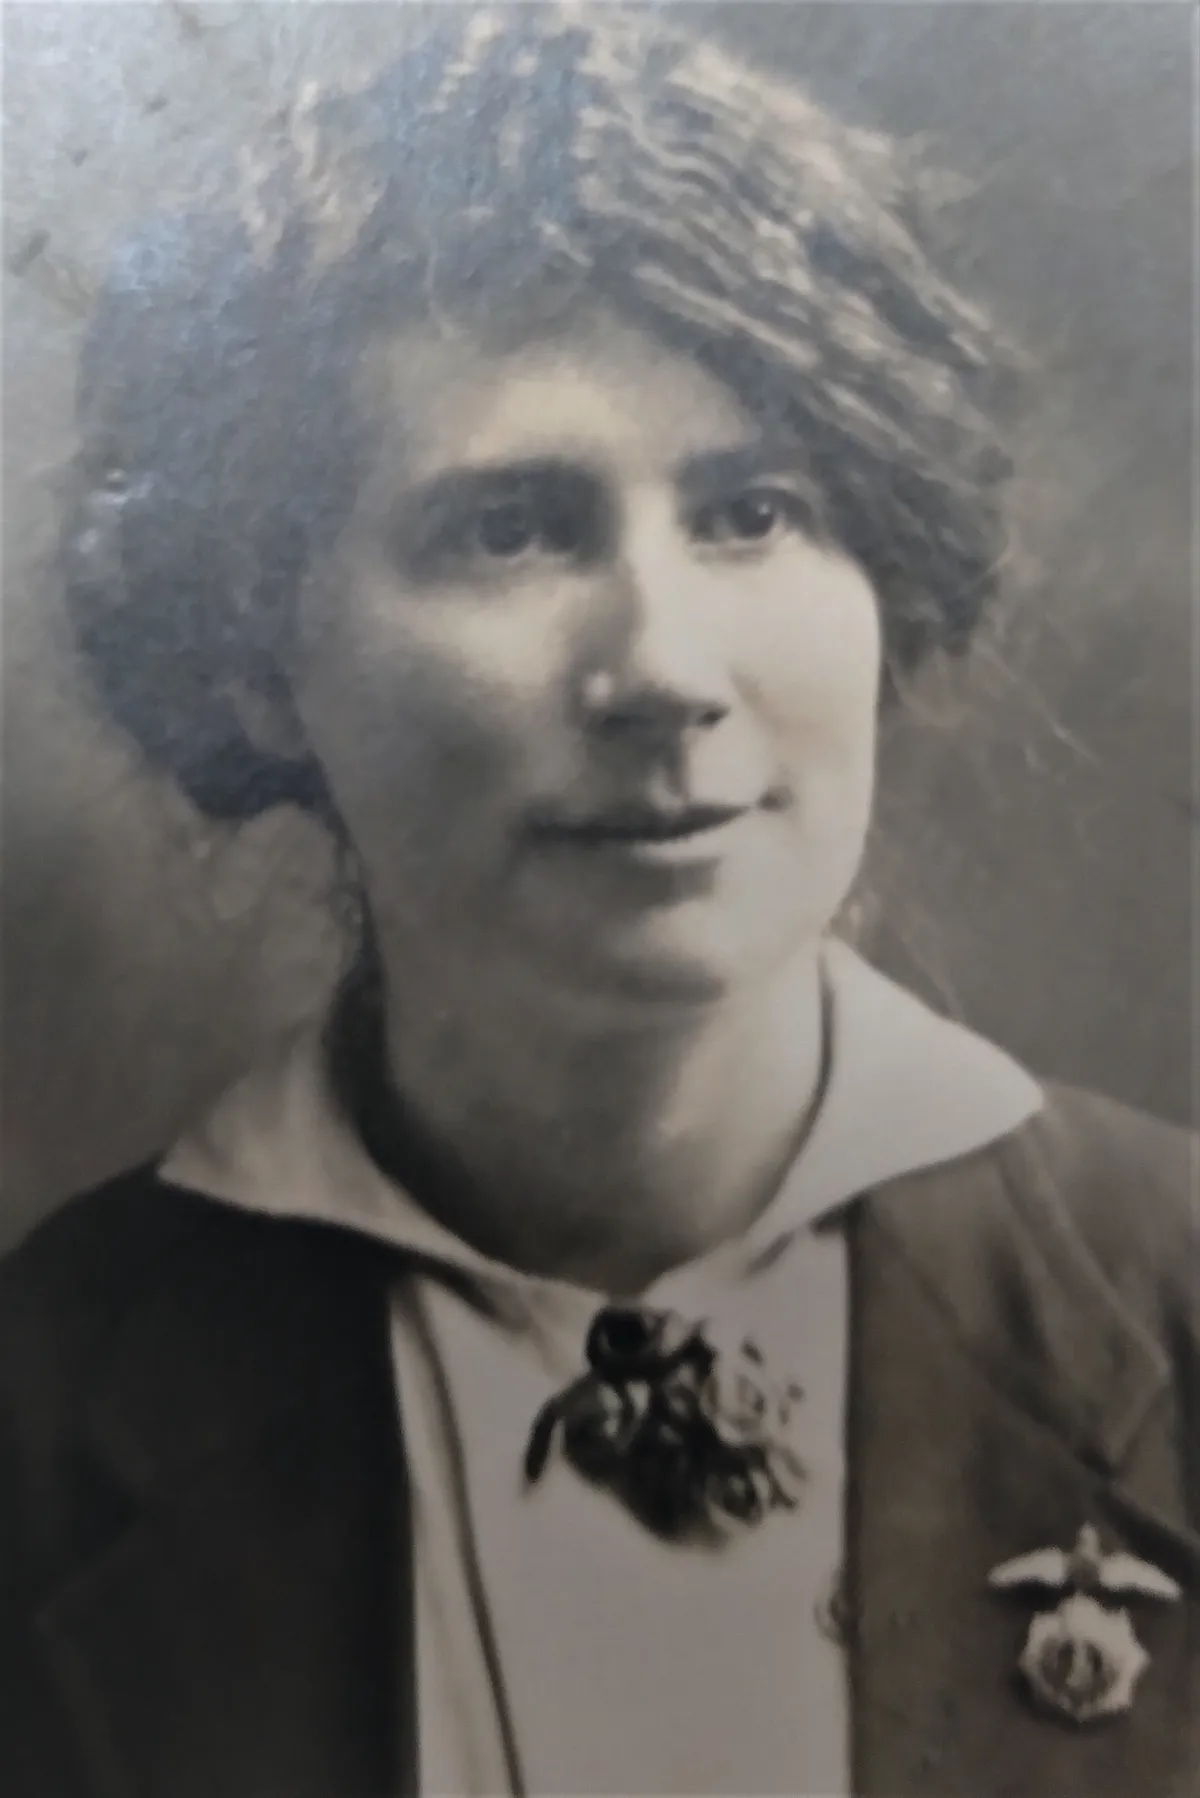 A black and white photograph of a young woman